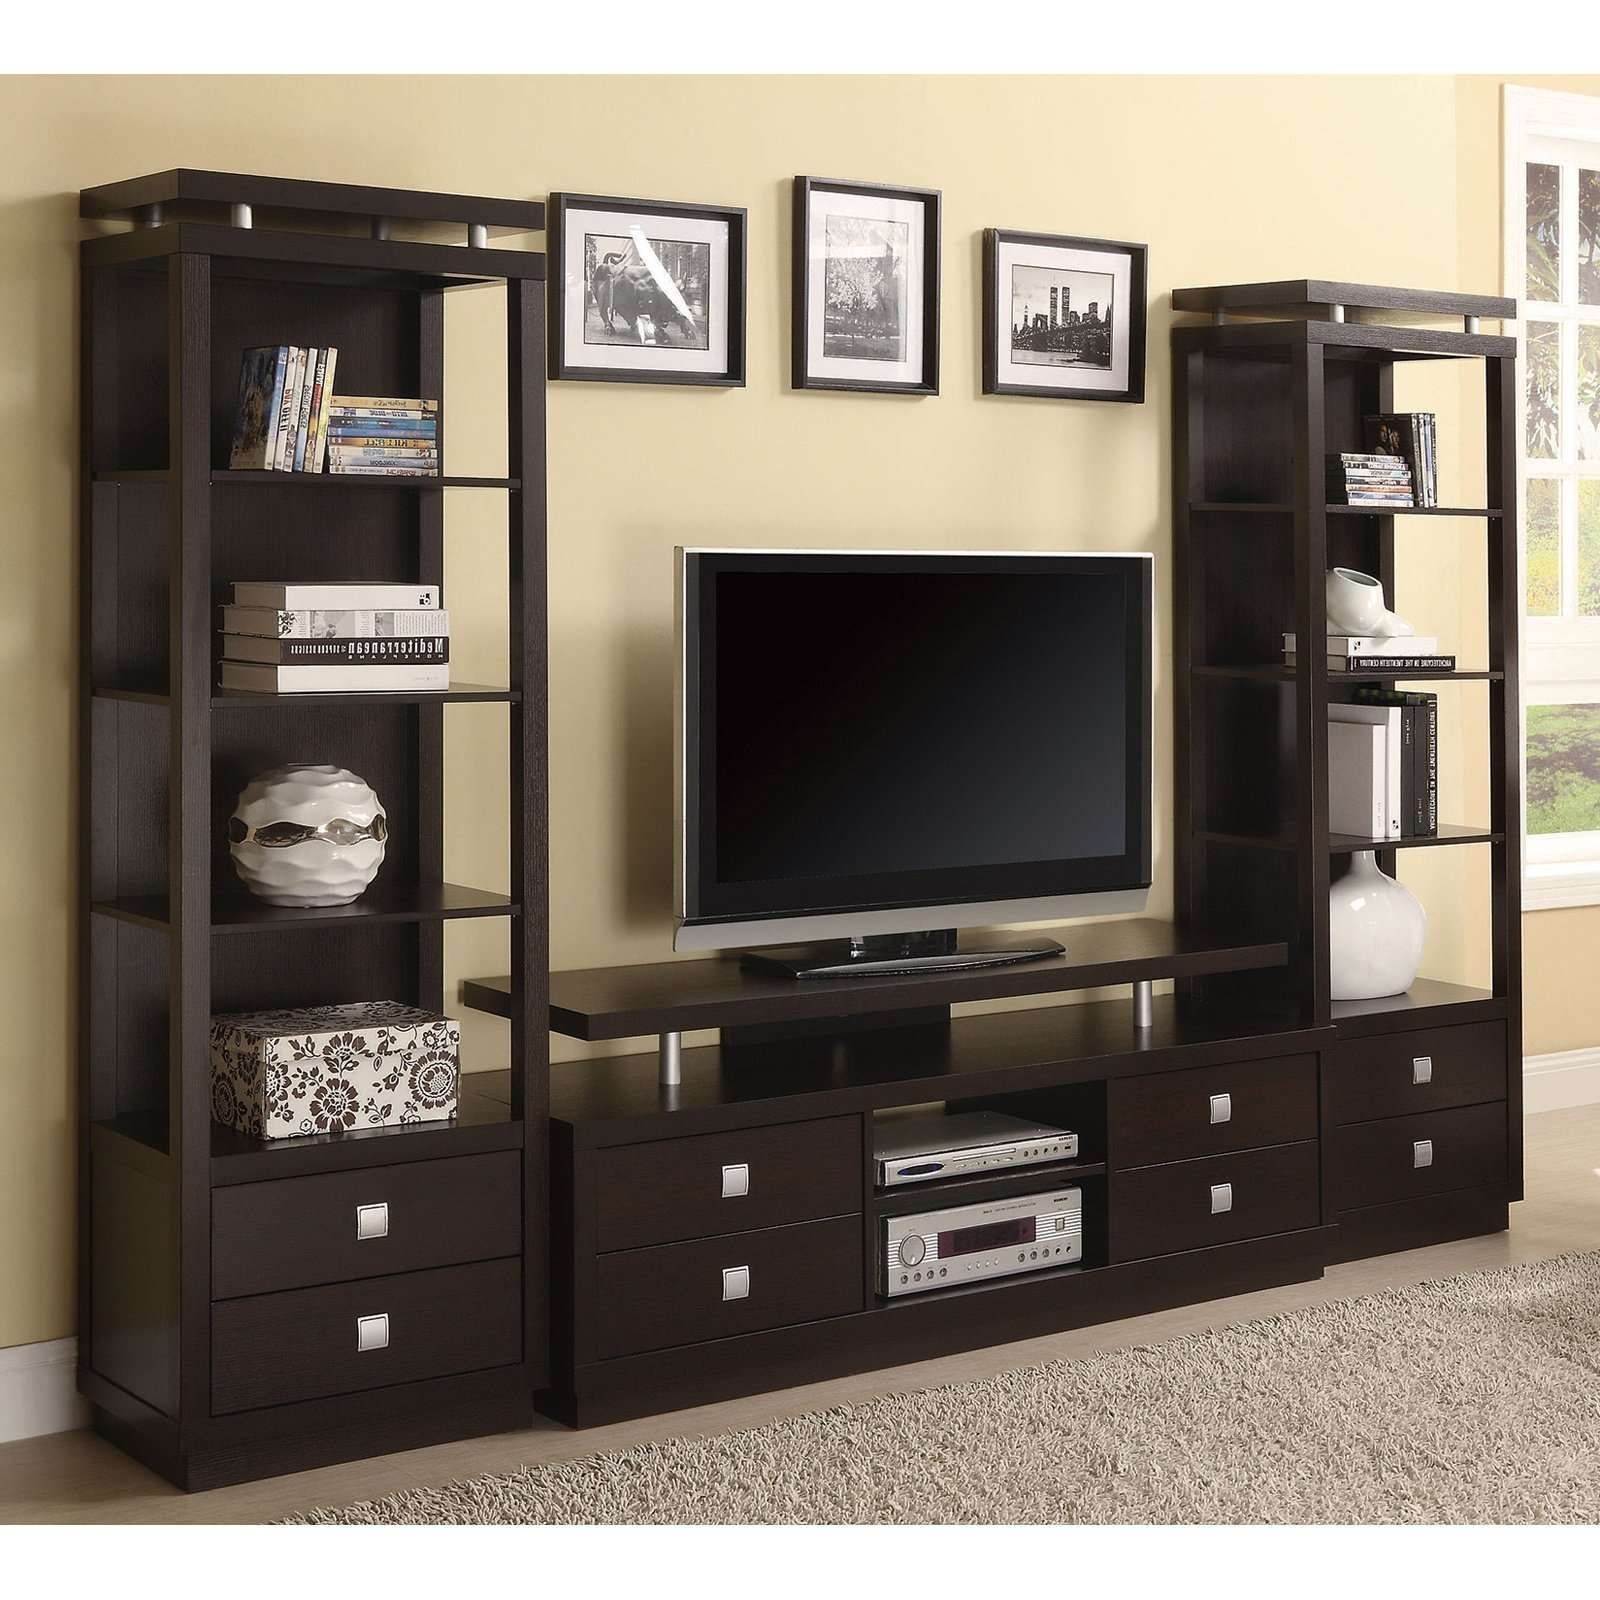 Wall Units: Amazing Walmart Tv Entertainment Centers Cheap Tv Pertaining To Cheap Wood Tv Stands (View 13 of 15)